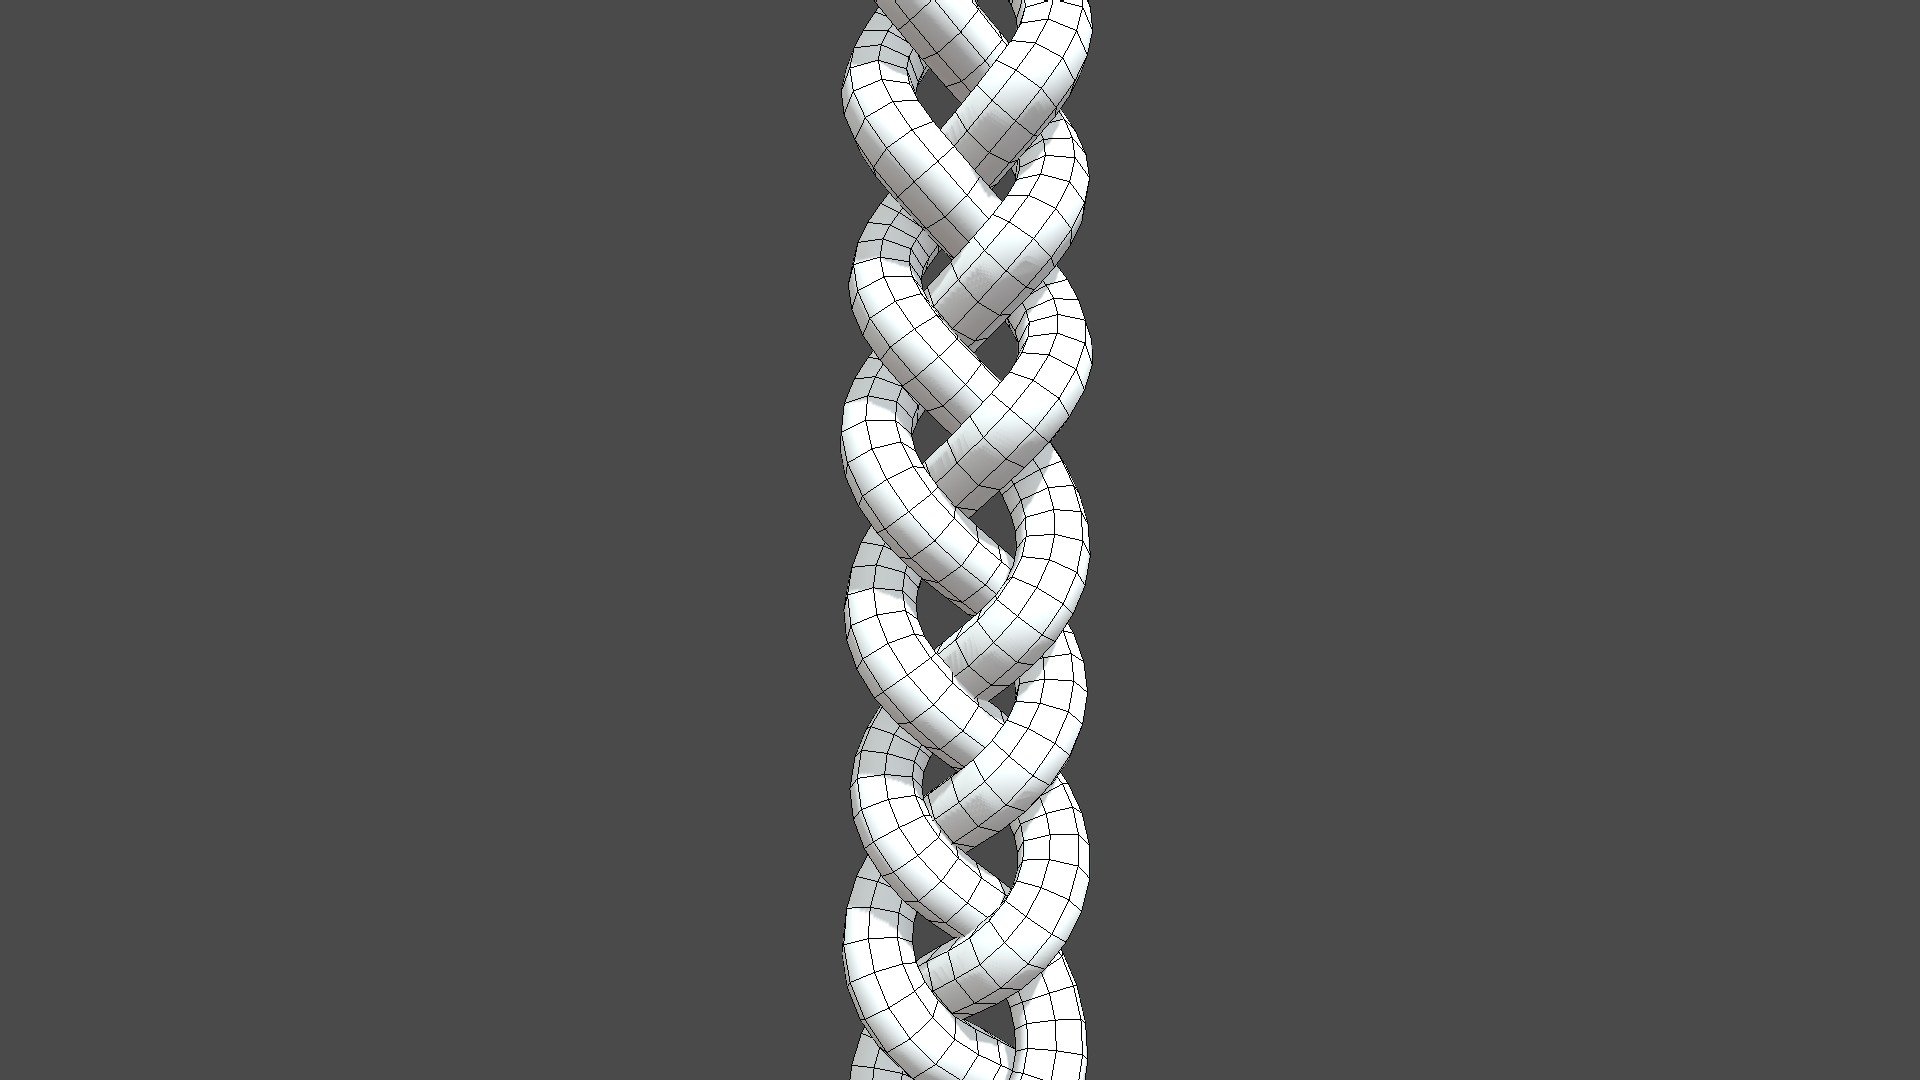 flat sinnet braid 4 variations

includes one 3 strand rope pattern

includes simple links

|| spec ||



no material



no textures



UVW Unwrapped


 - Flat sinnet braid - 3D model by hasp (@hospis) 3d model